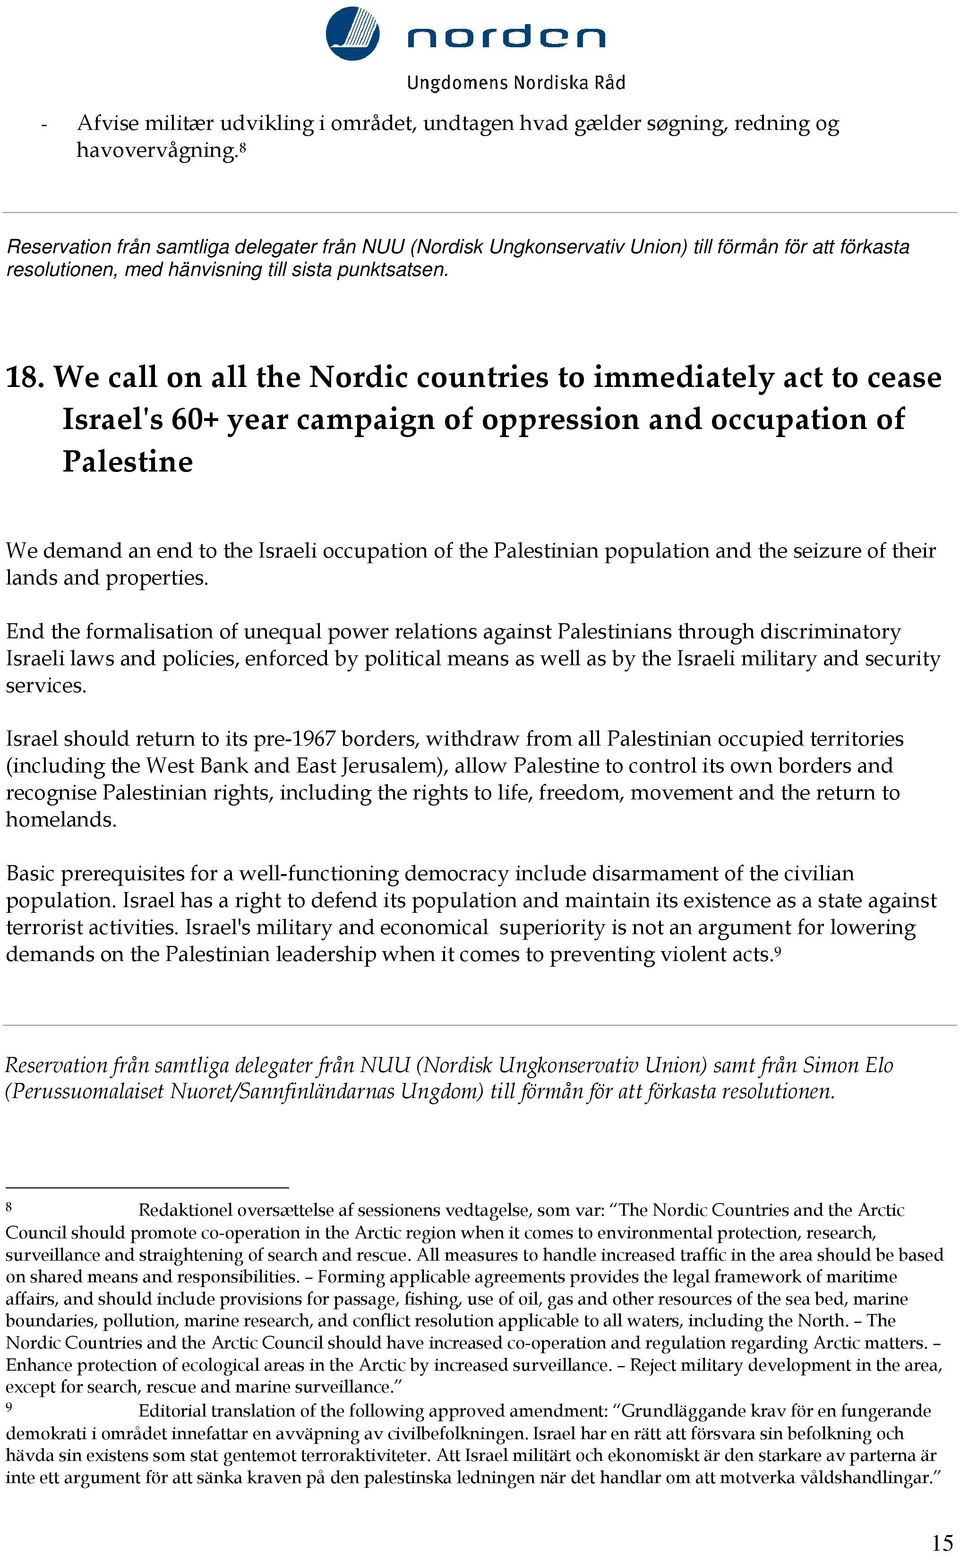 We call on all the Nordic countries to immediately act to cease Israel's 60+ year campaign of oppression and occupation of Palestine We demand an end to the Israeli occupation of the Palestinian